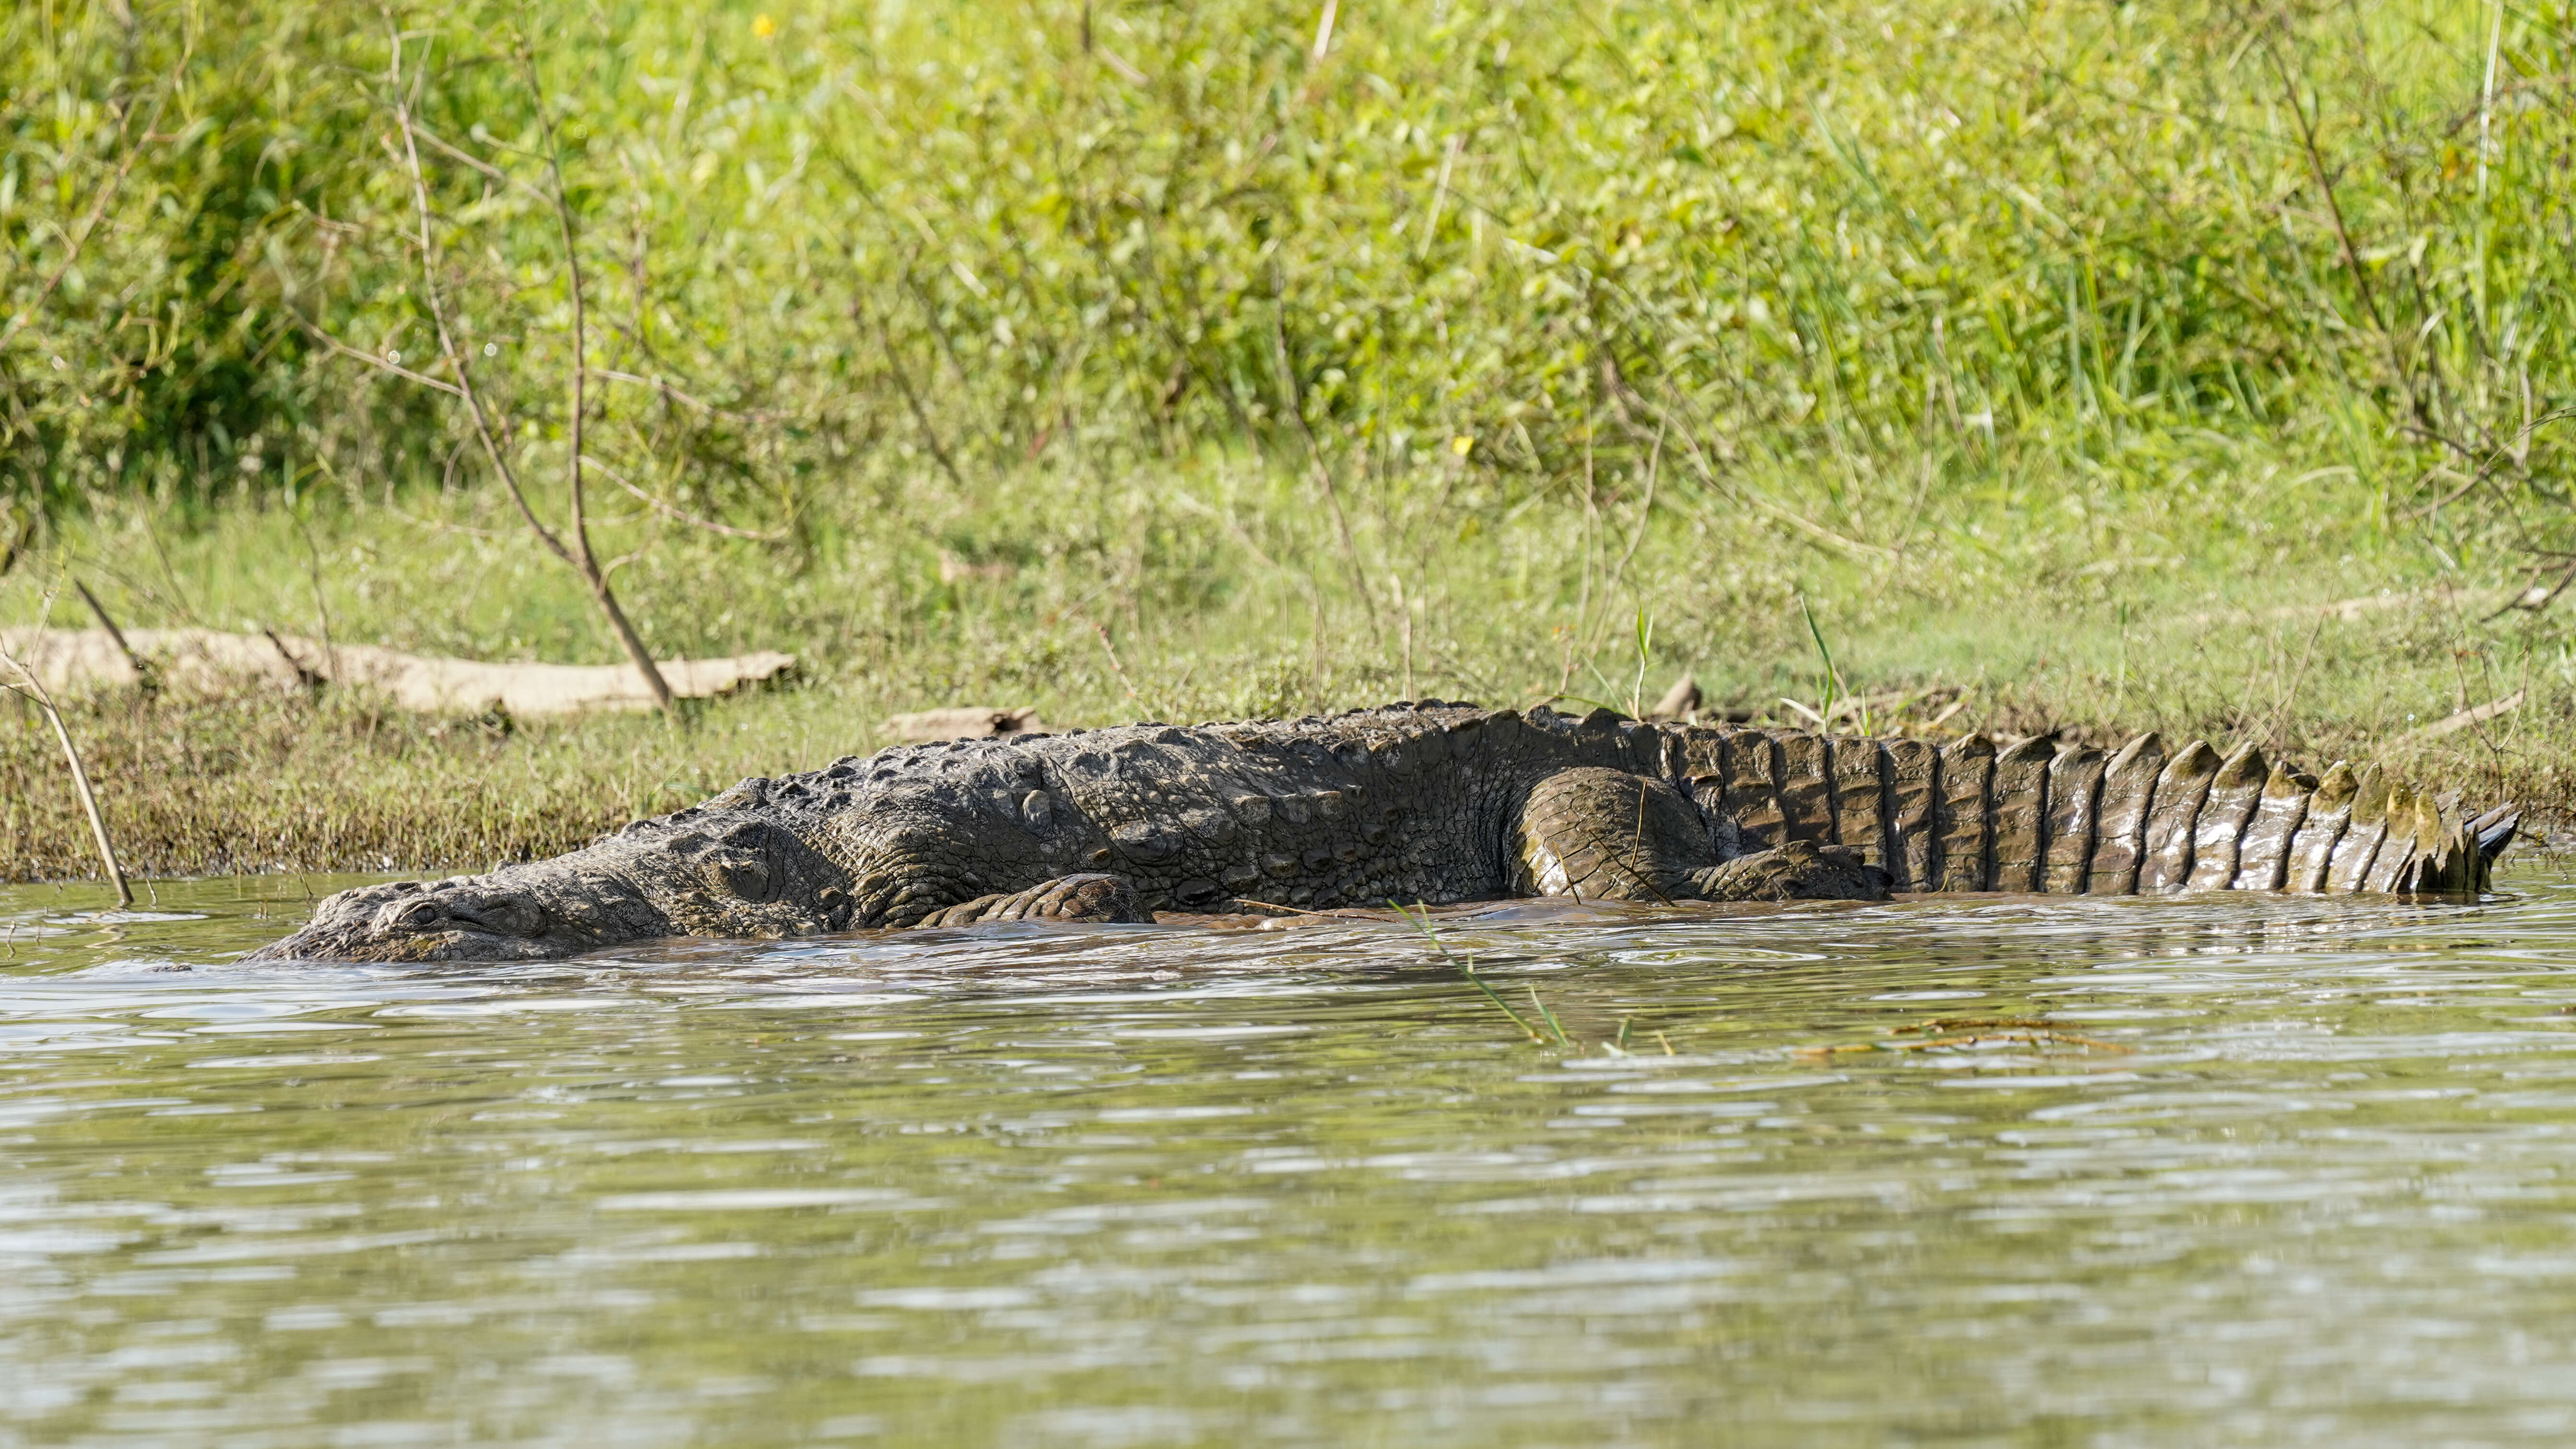 Image of Broad-snouted Crocodile